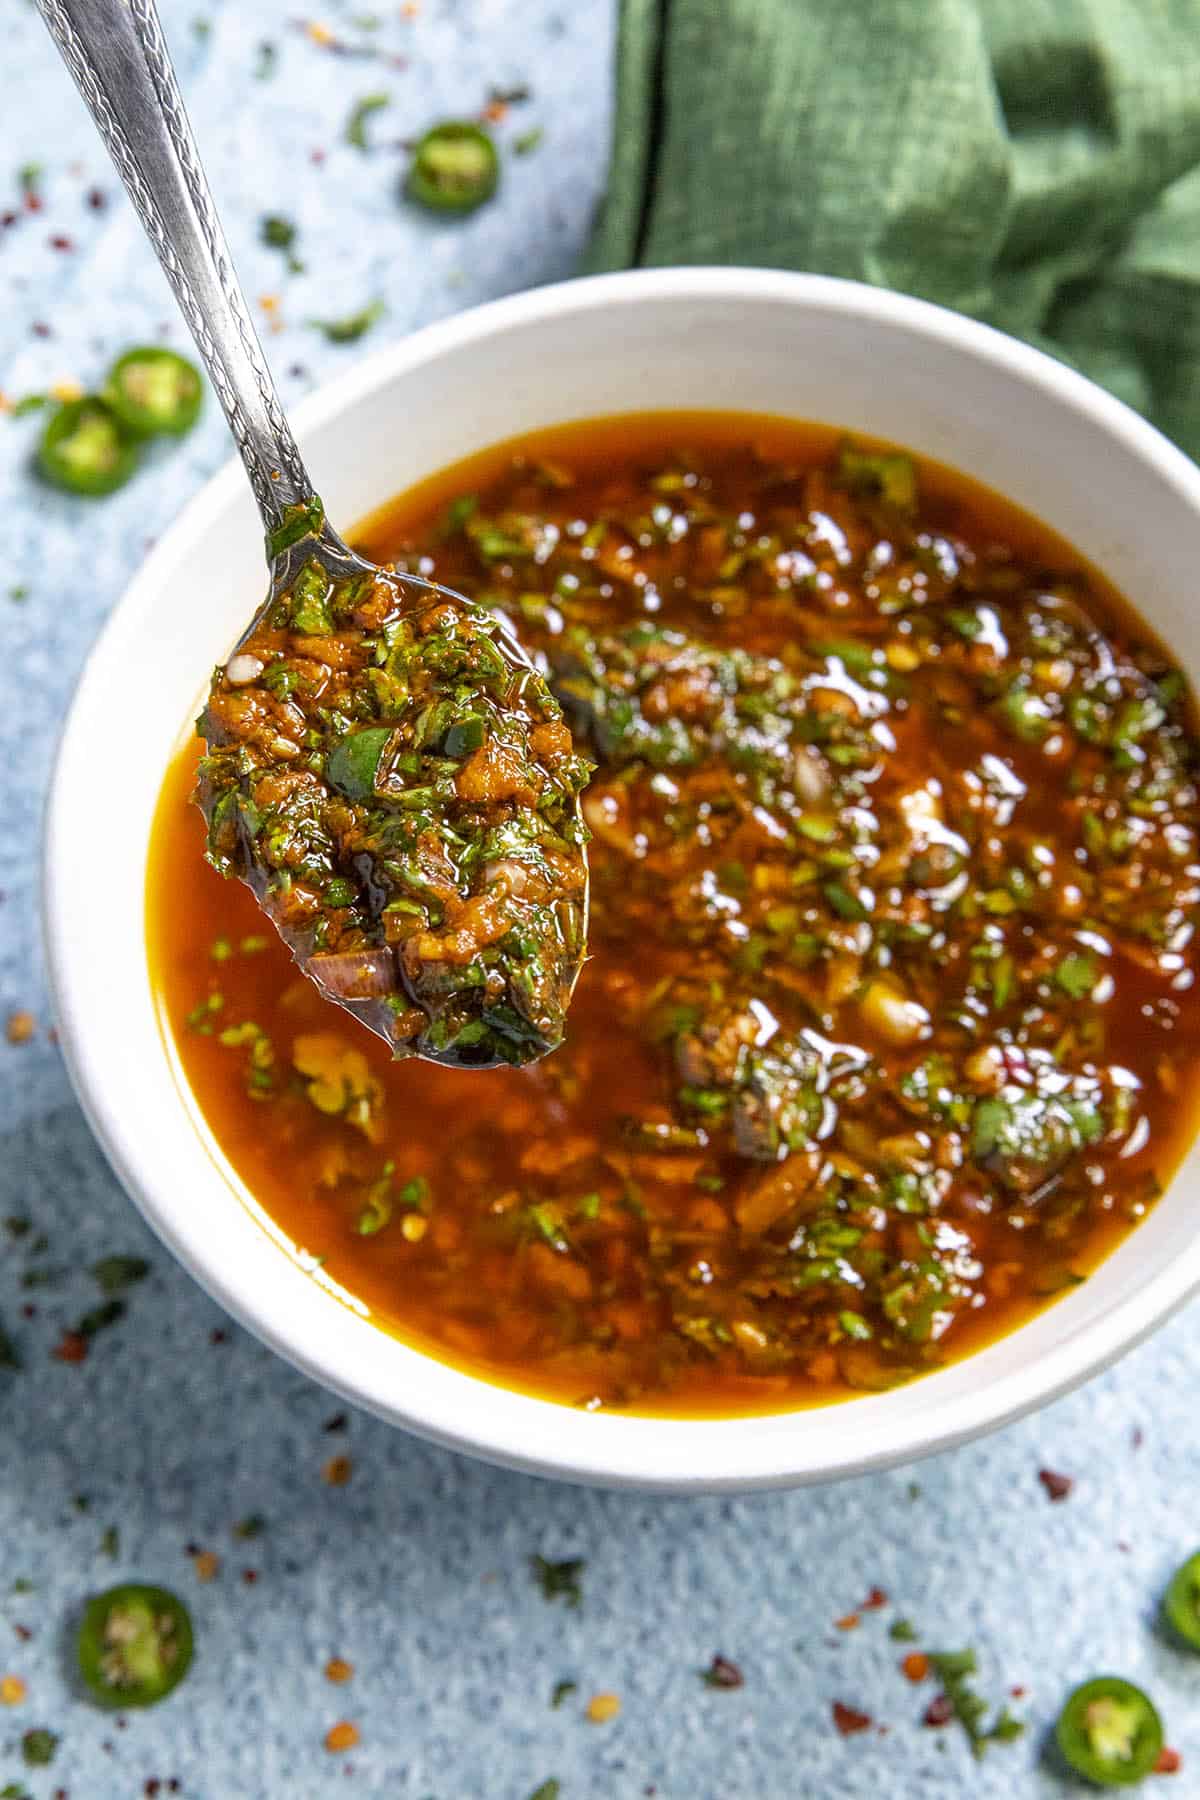 A spoonful of Chermoula sauce from a bowl